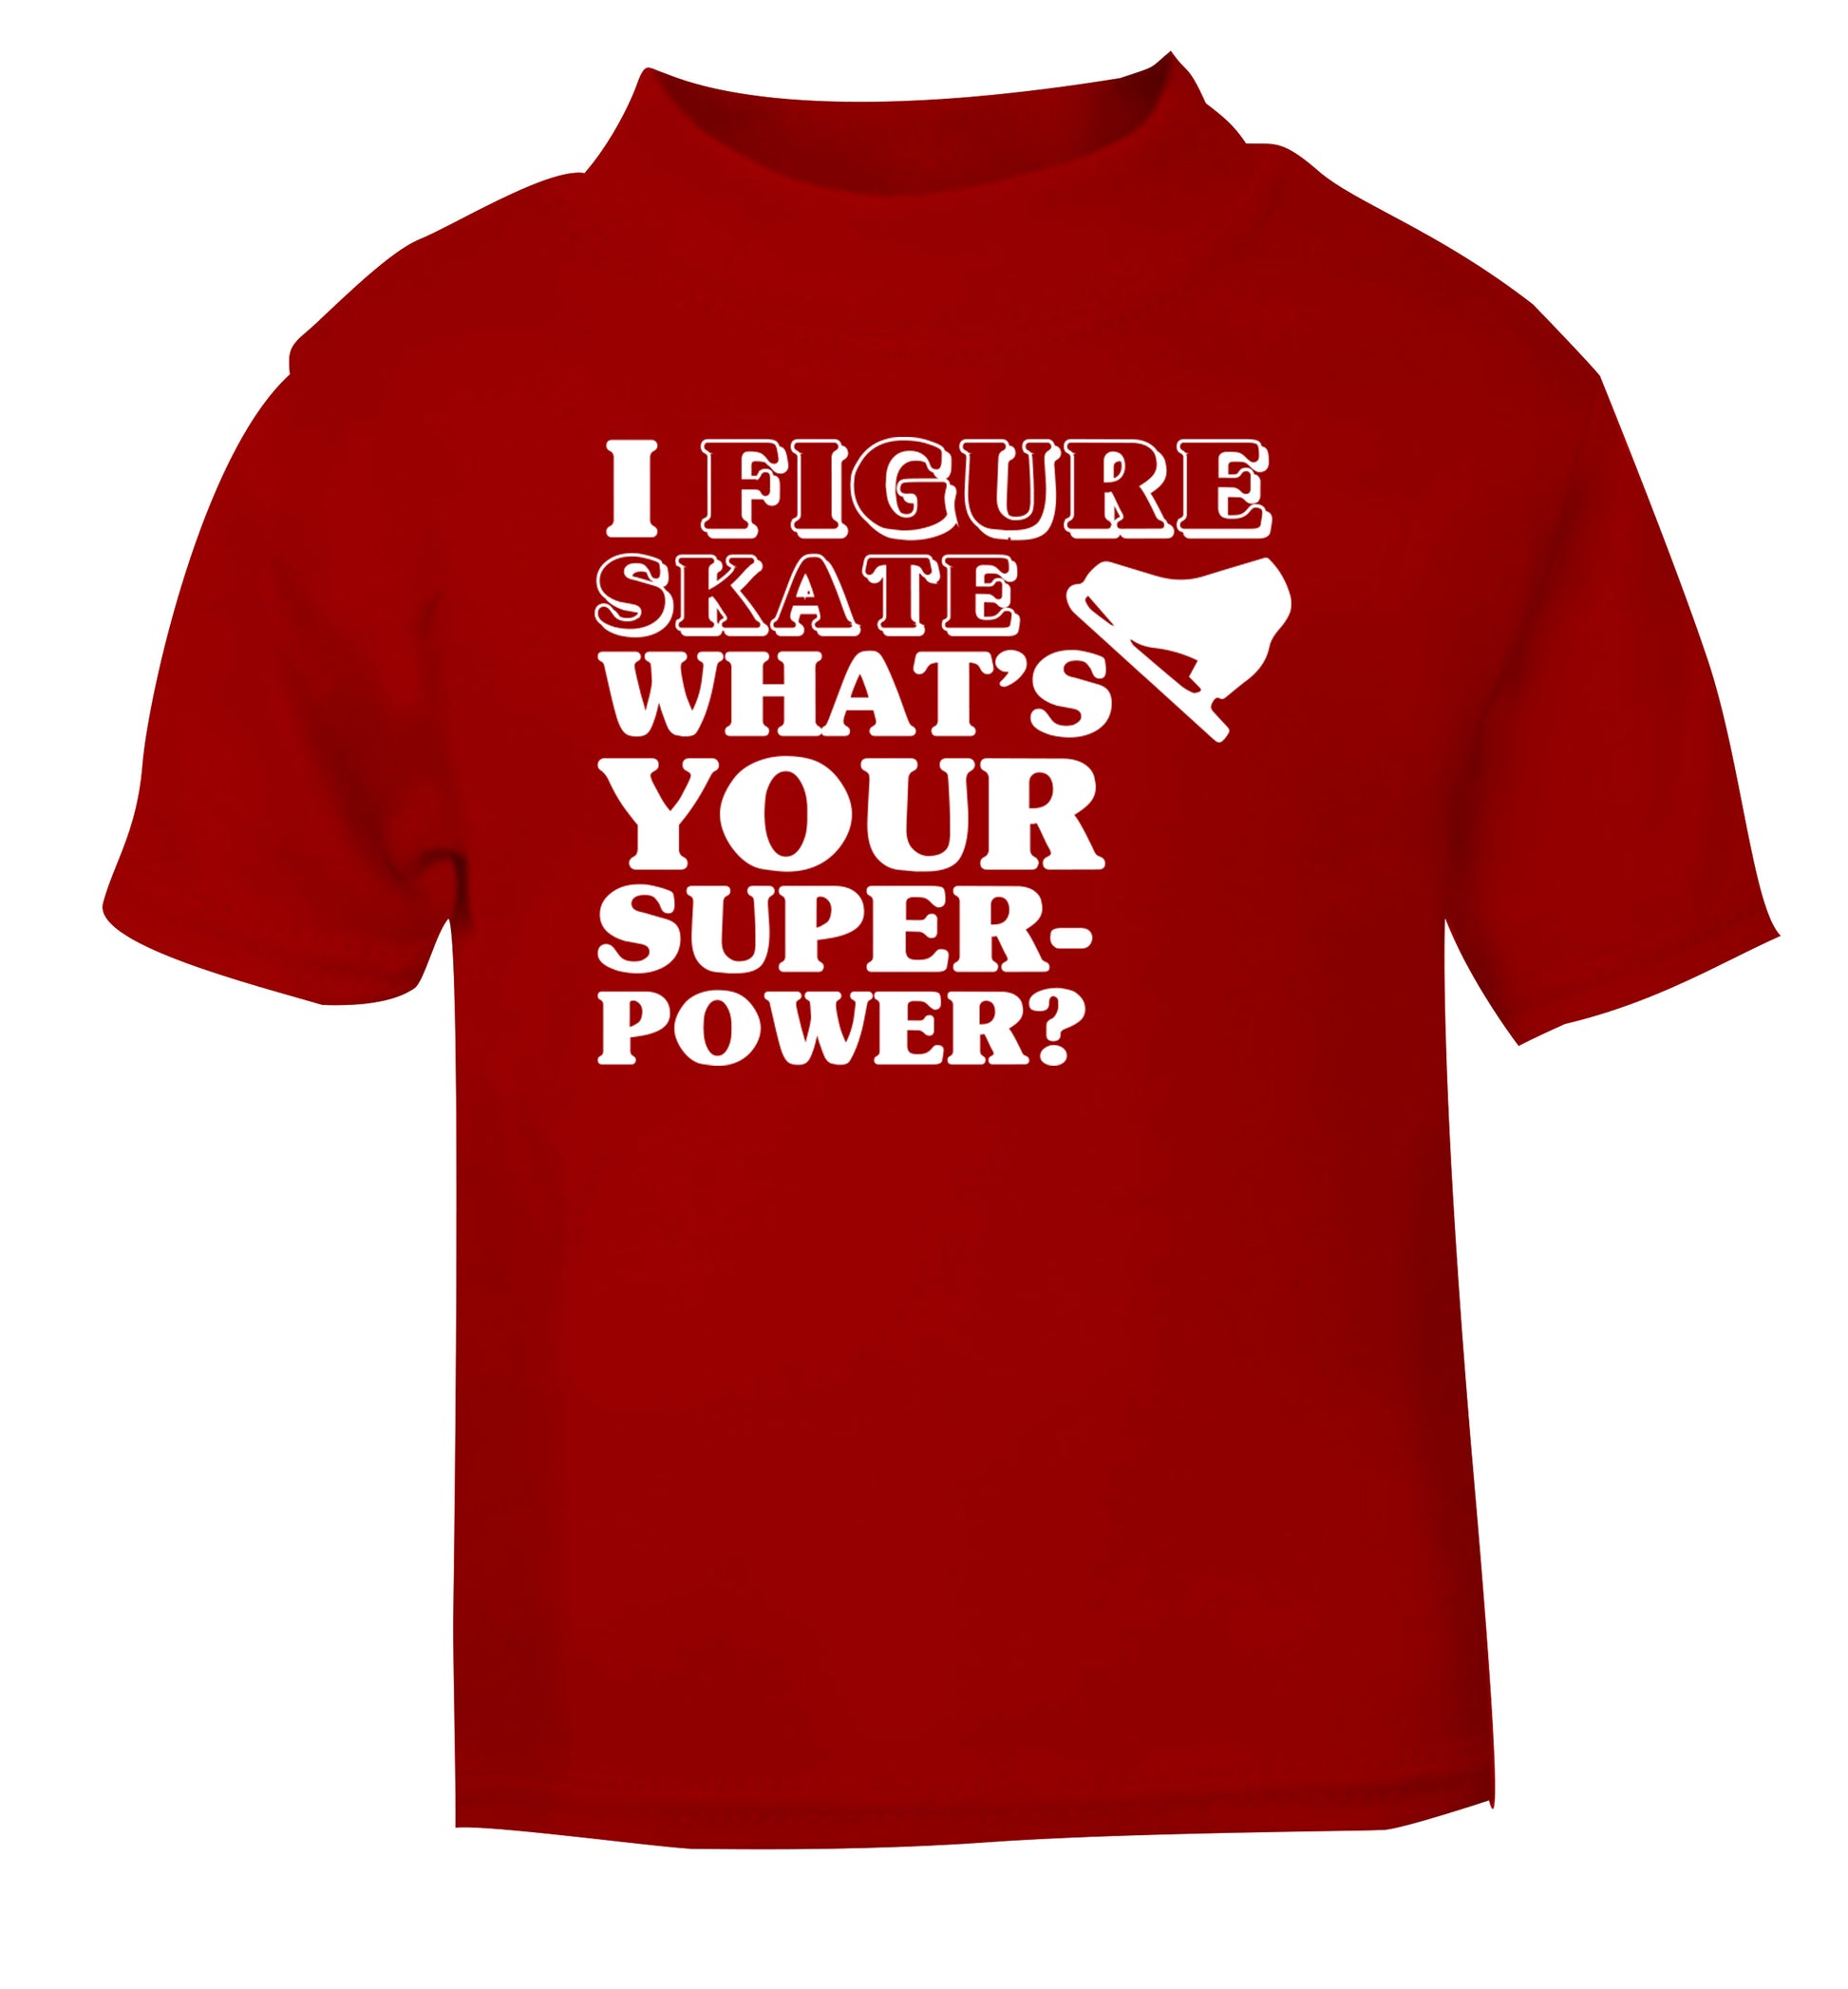 I figure skate what's your superpower? red Baby Toddler Tshirt 2 Years